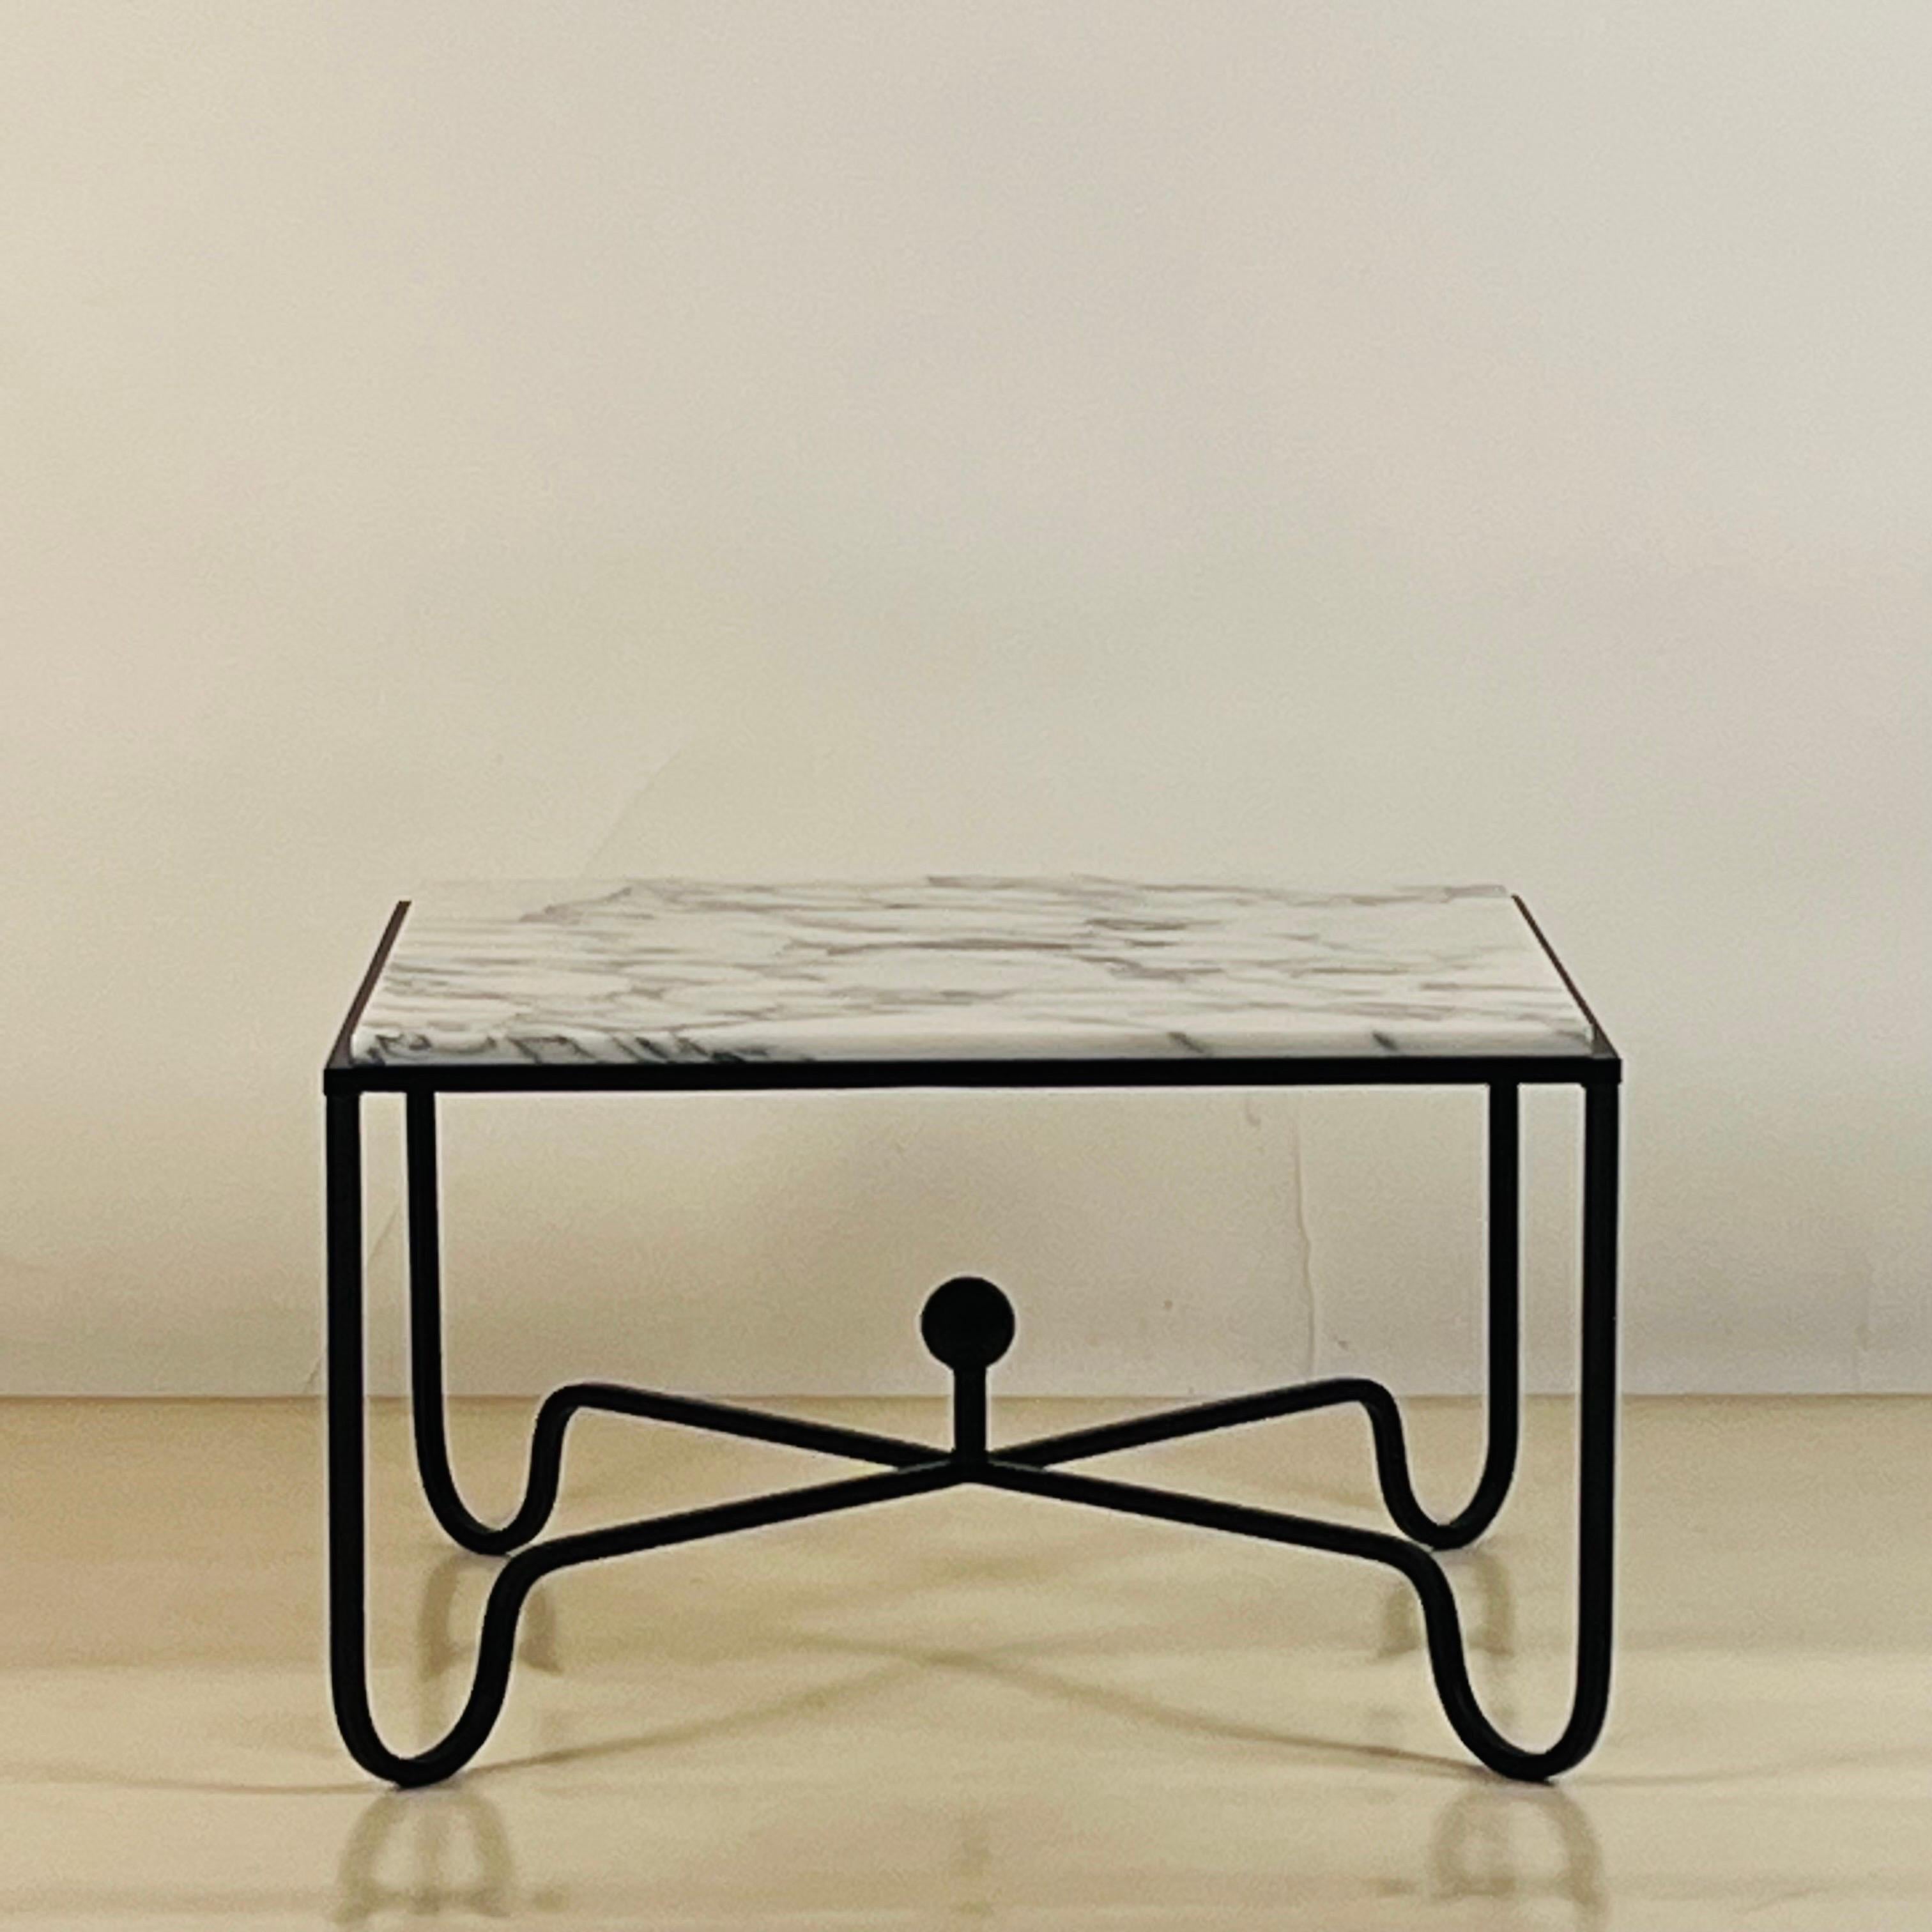 Chic 3-Part Arabescato Marble 'Entretoise' Coffee Table by Design Frères In New Condition For Sale In Los Angeles, CA